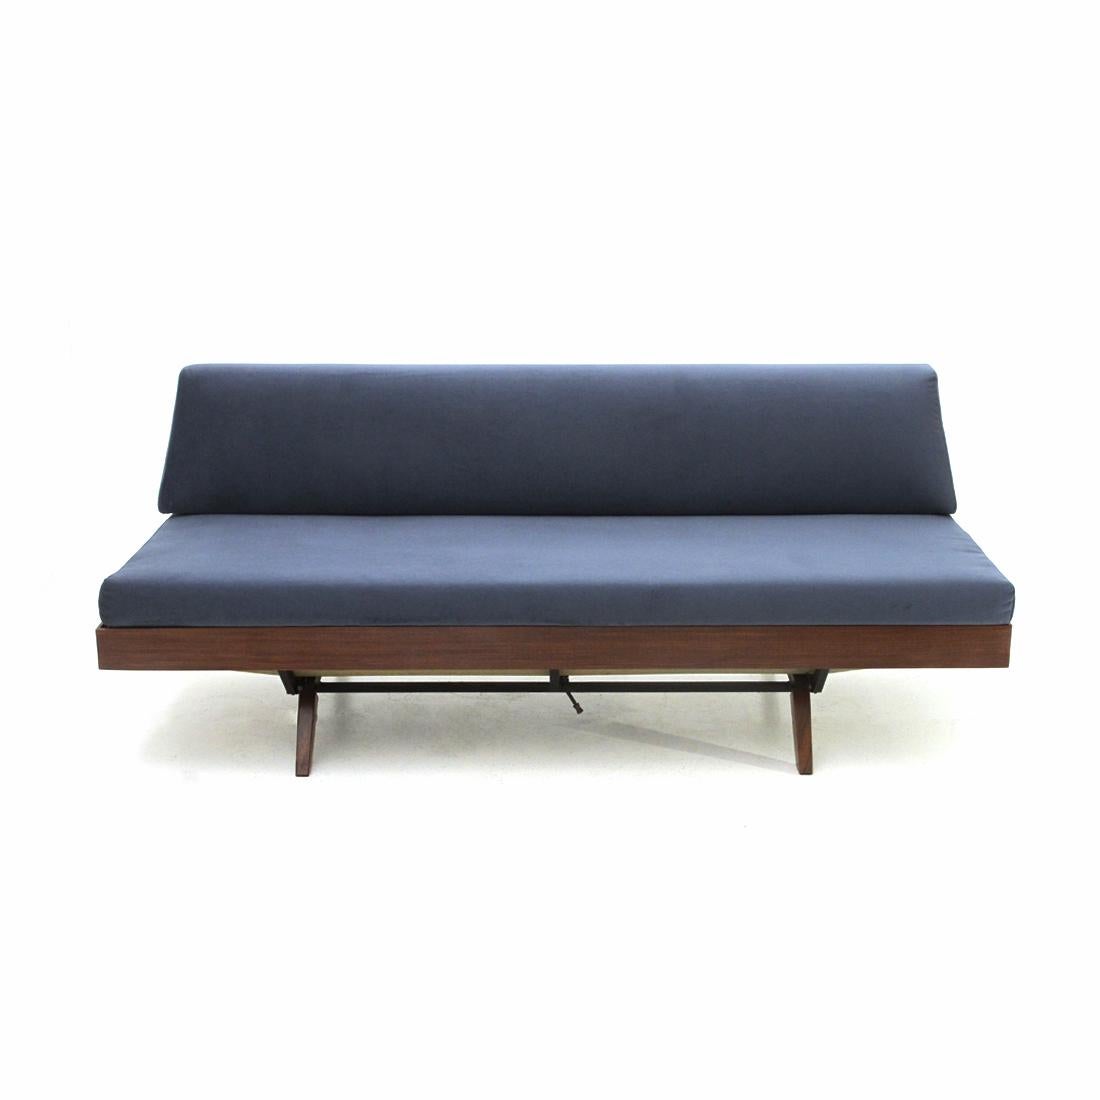 Sofa produced in the 1950s by Busnelli.
Structure in black painted metal
Seat formed by a teak frame, metal mesh adjustable in different positions, fiberglass container.
Padded and lined cushion.
Padded and lined wooden back.
Feet in metal